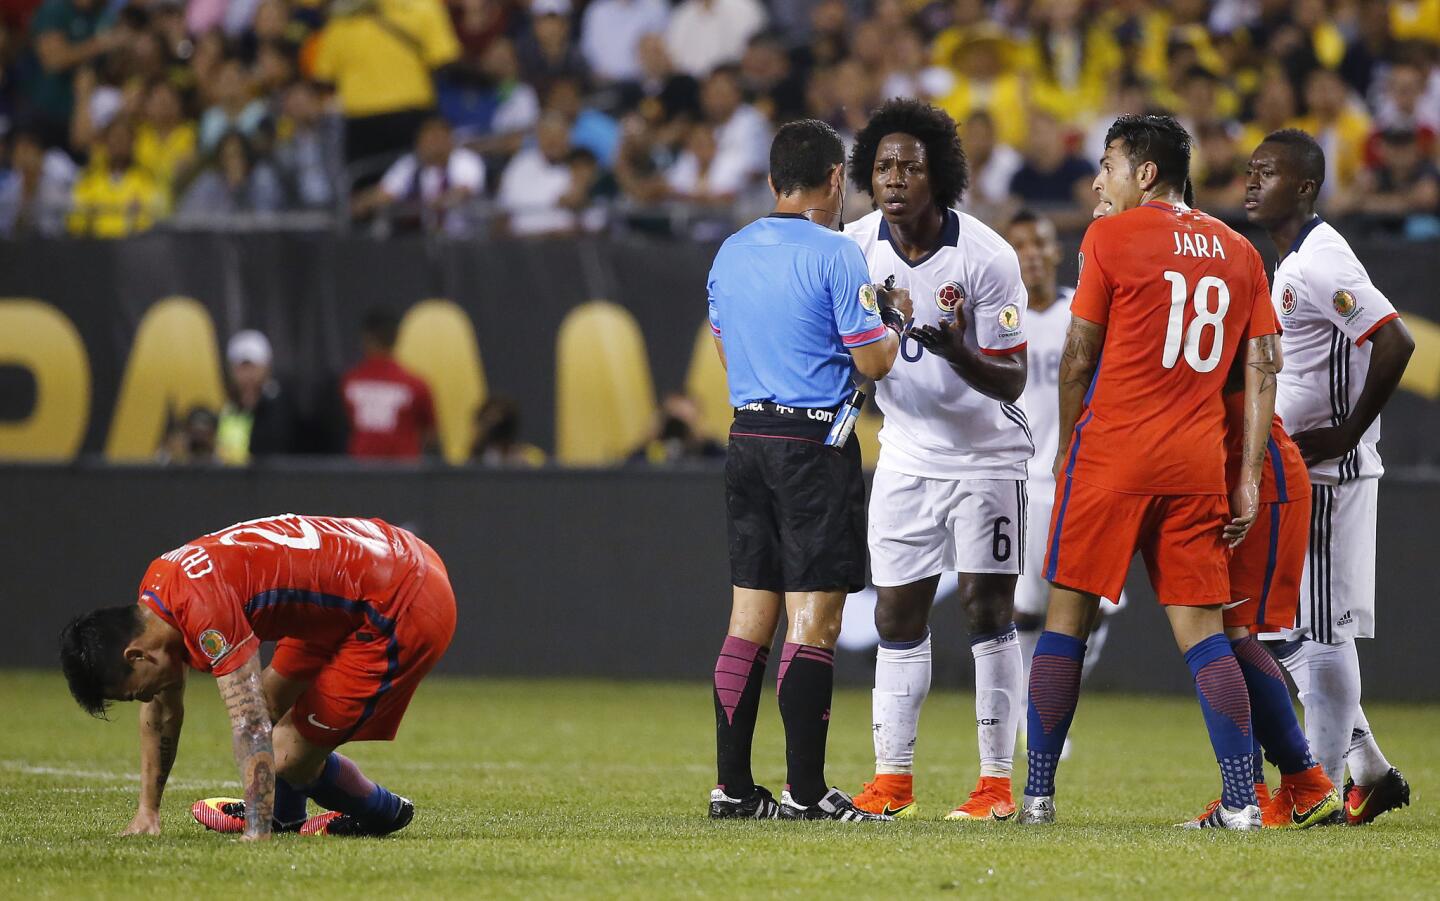 Colombia's Carlos Sanchez (6) appeals to referee Joel Aguilar after receiving the first of two yellow cards during a Copa America Centenario semifinal soccer match against Chile at Soldier Field in Chicago, Wednesday, June 22, 2016. (AP Photo/Charles Rex Arbogast)